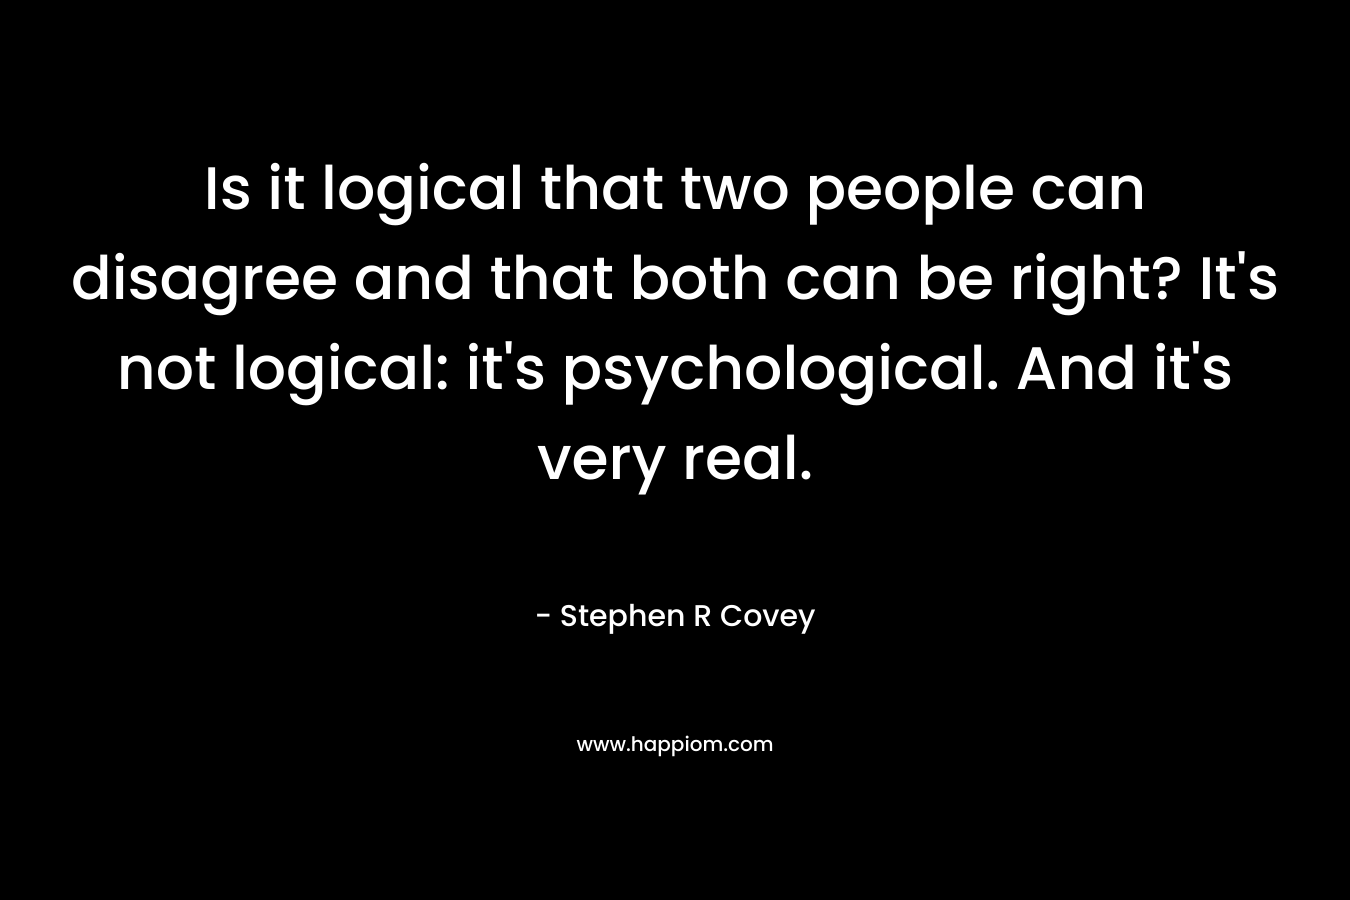 Is it logical that two people can disagree and that both can be right? It’s not logical: it’s psychological. And it’s very real. – Stephen R Covey